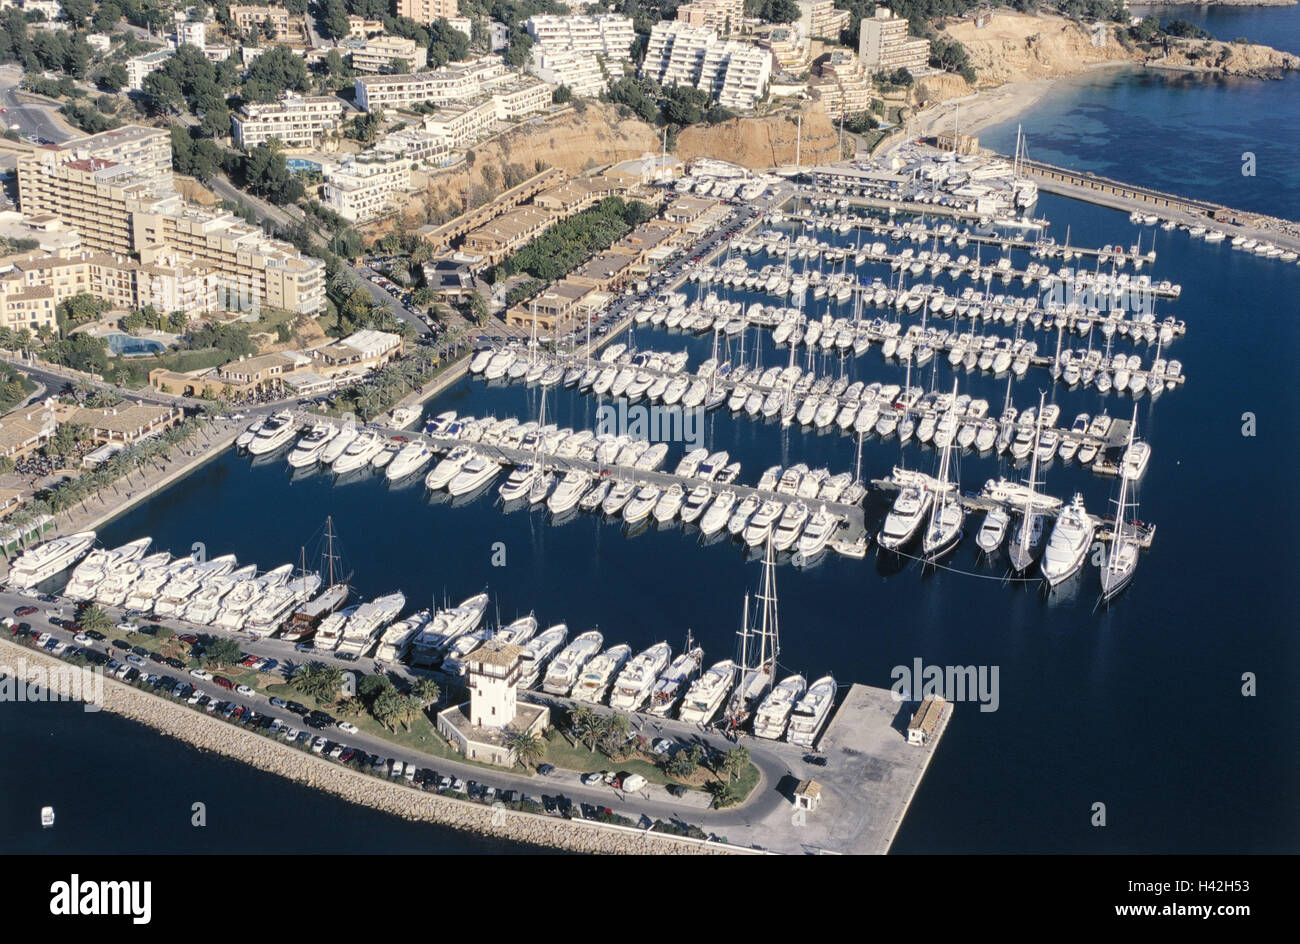 Spain, Majorca, Puerto portal, harbour, overview, the Mediterranean Sea, the Balearic Islands, island, town, harbour basin, yacht harbour, ships, boots, yachts, destination, holiday destination, tourism Stock Photo